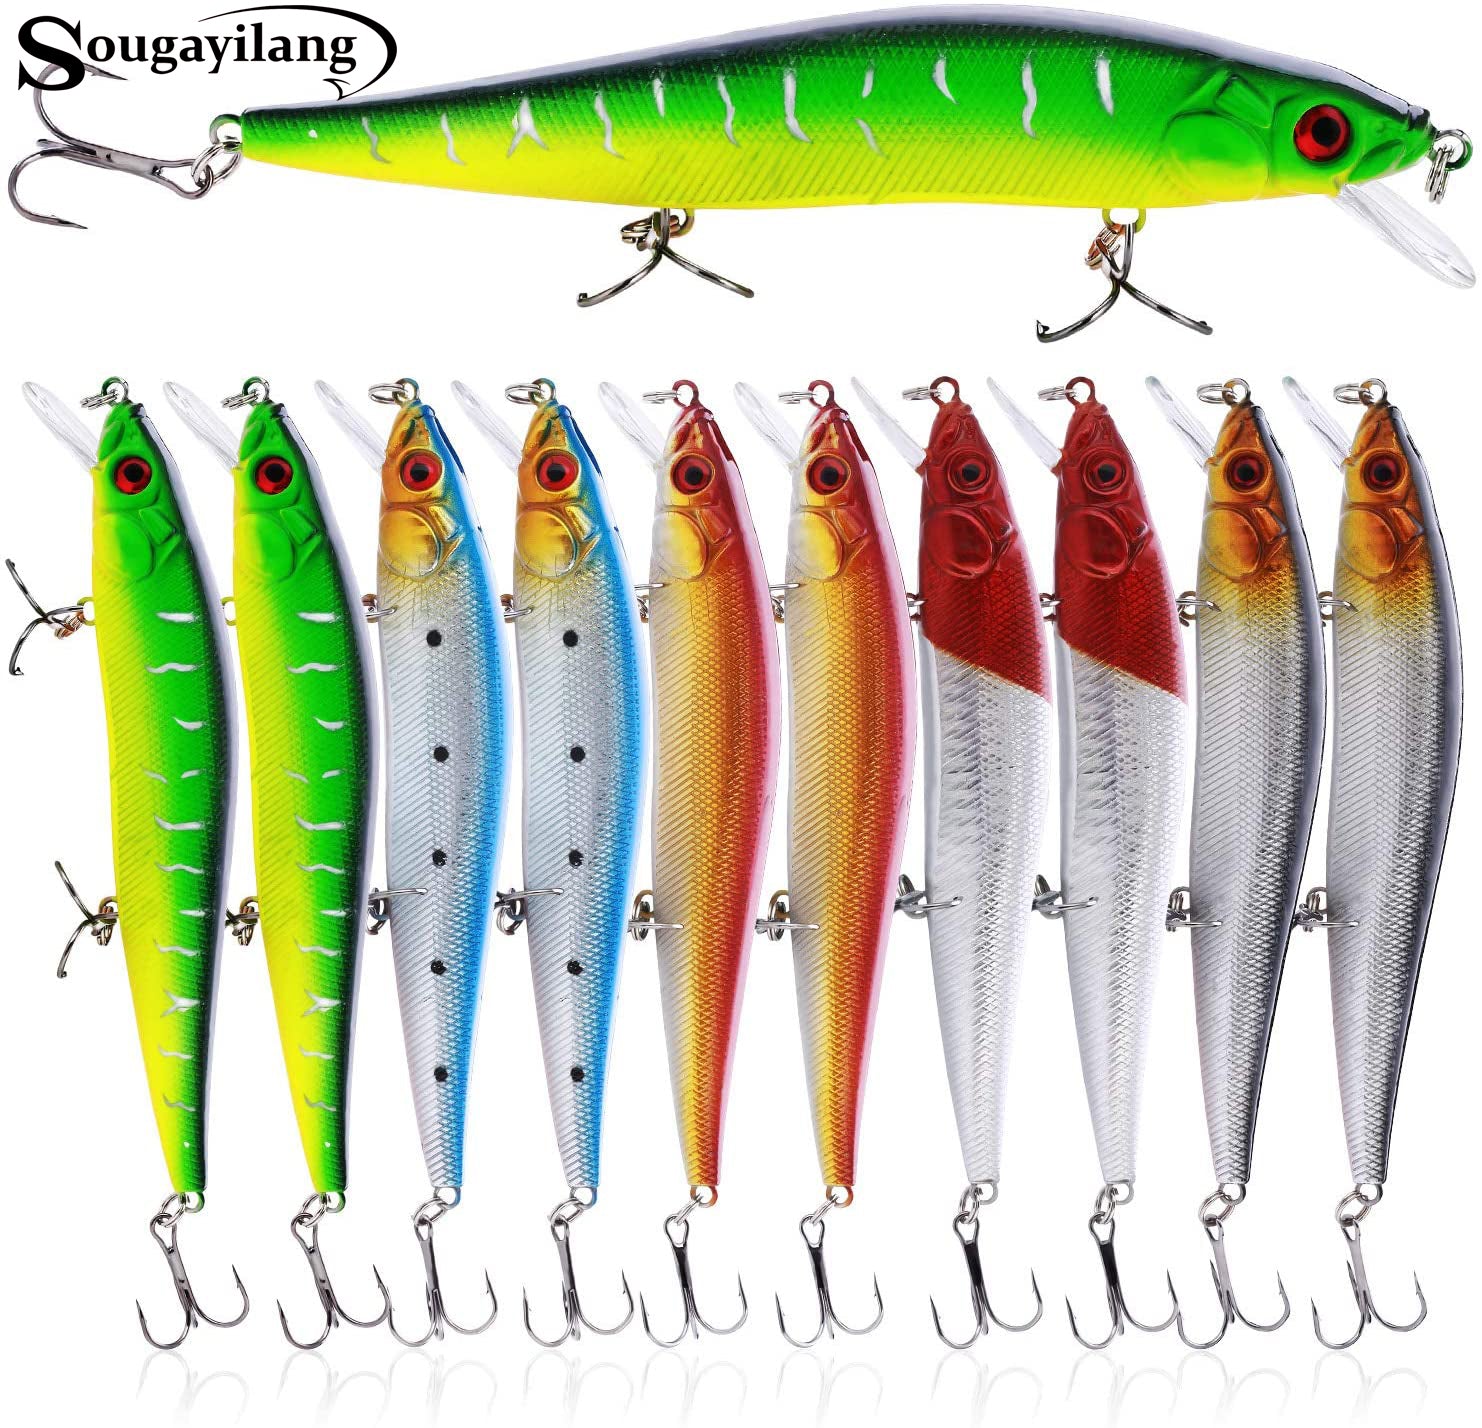 Fishing Lures Hard Bait Minnow VIB Lure with Treble Hook Life-Like Swimbait  Fishing Bait Popper Crankbait Vibe Sinking Lure for Bass Trout Walleye  Redfish, Hard Fishing Lures for Freshwater Saltwater, Sinking Lures 